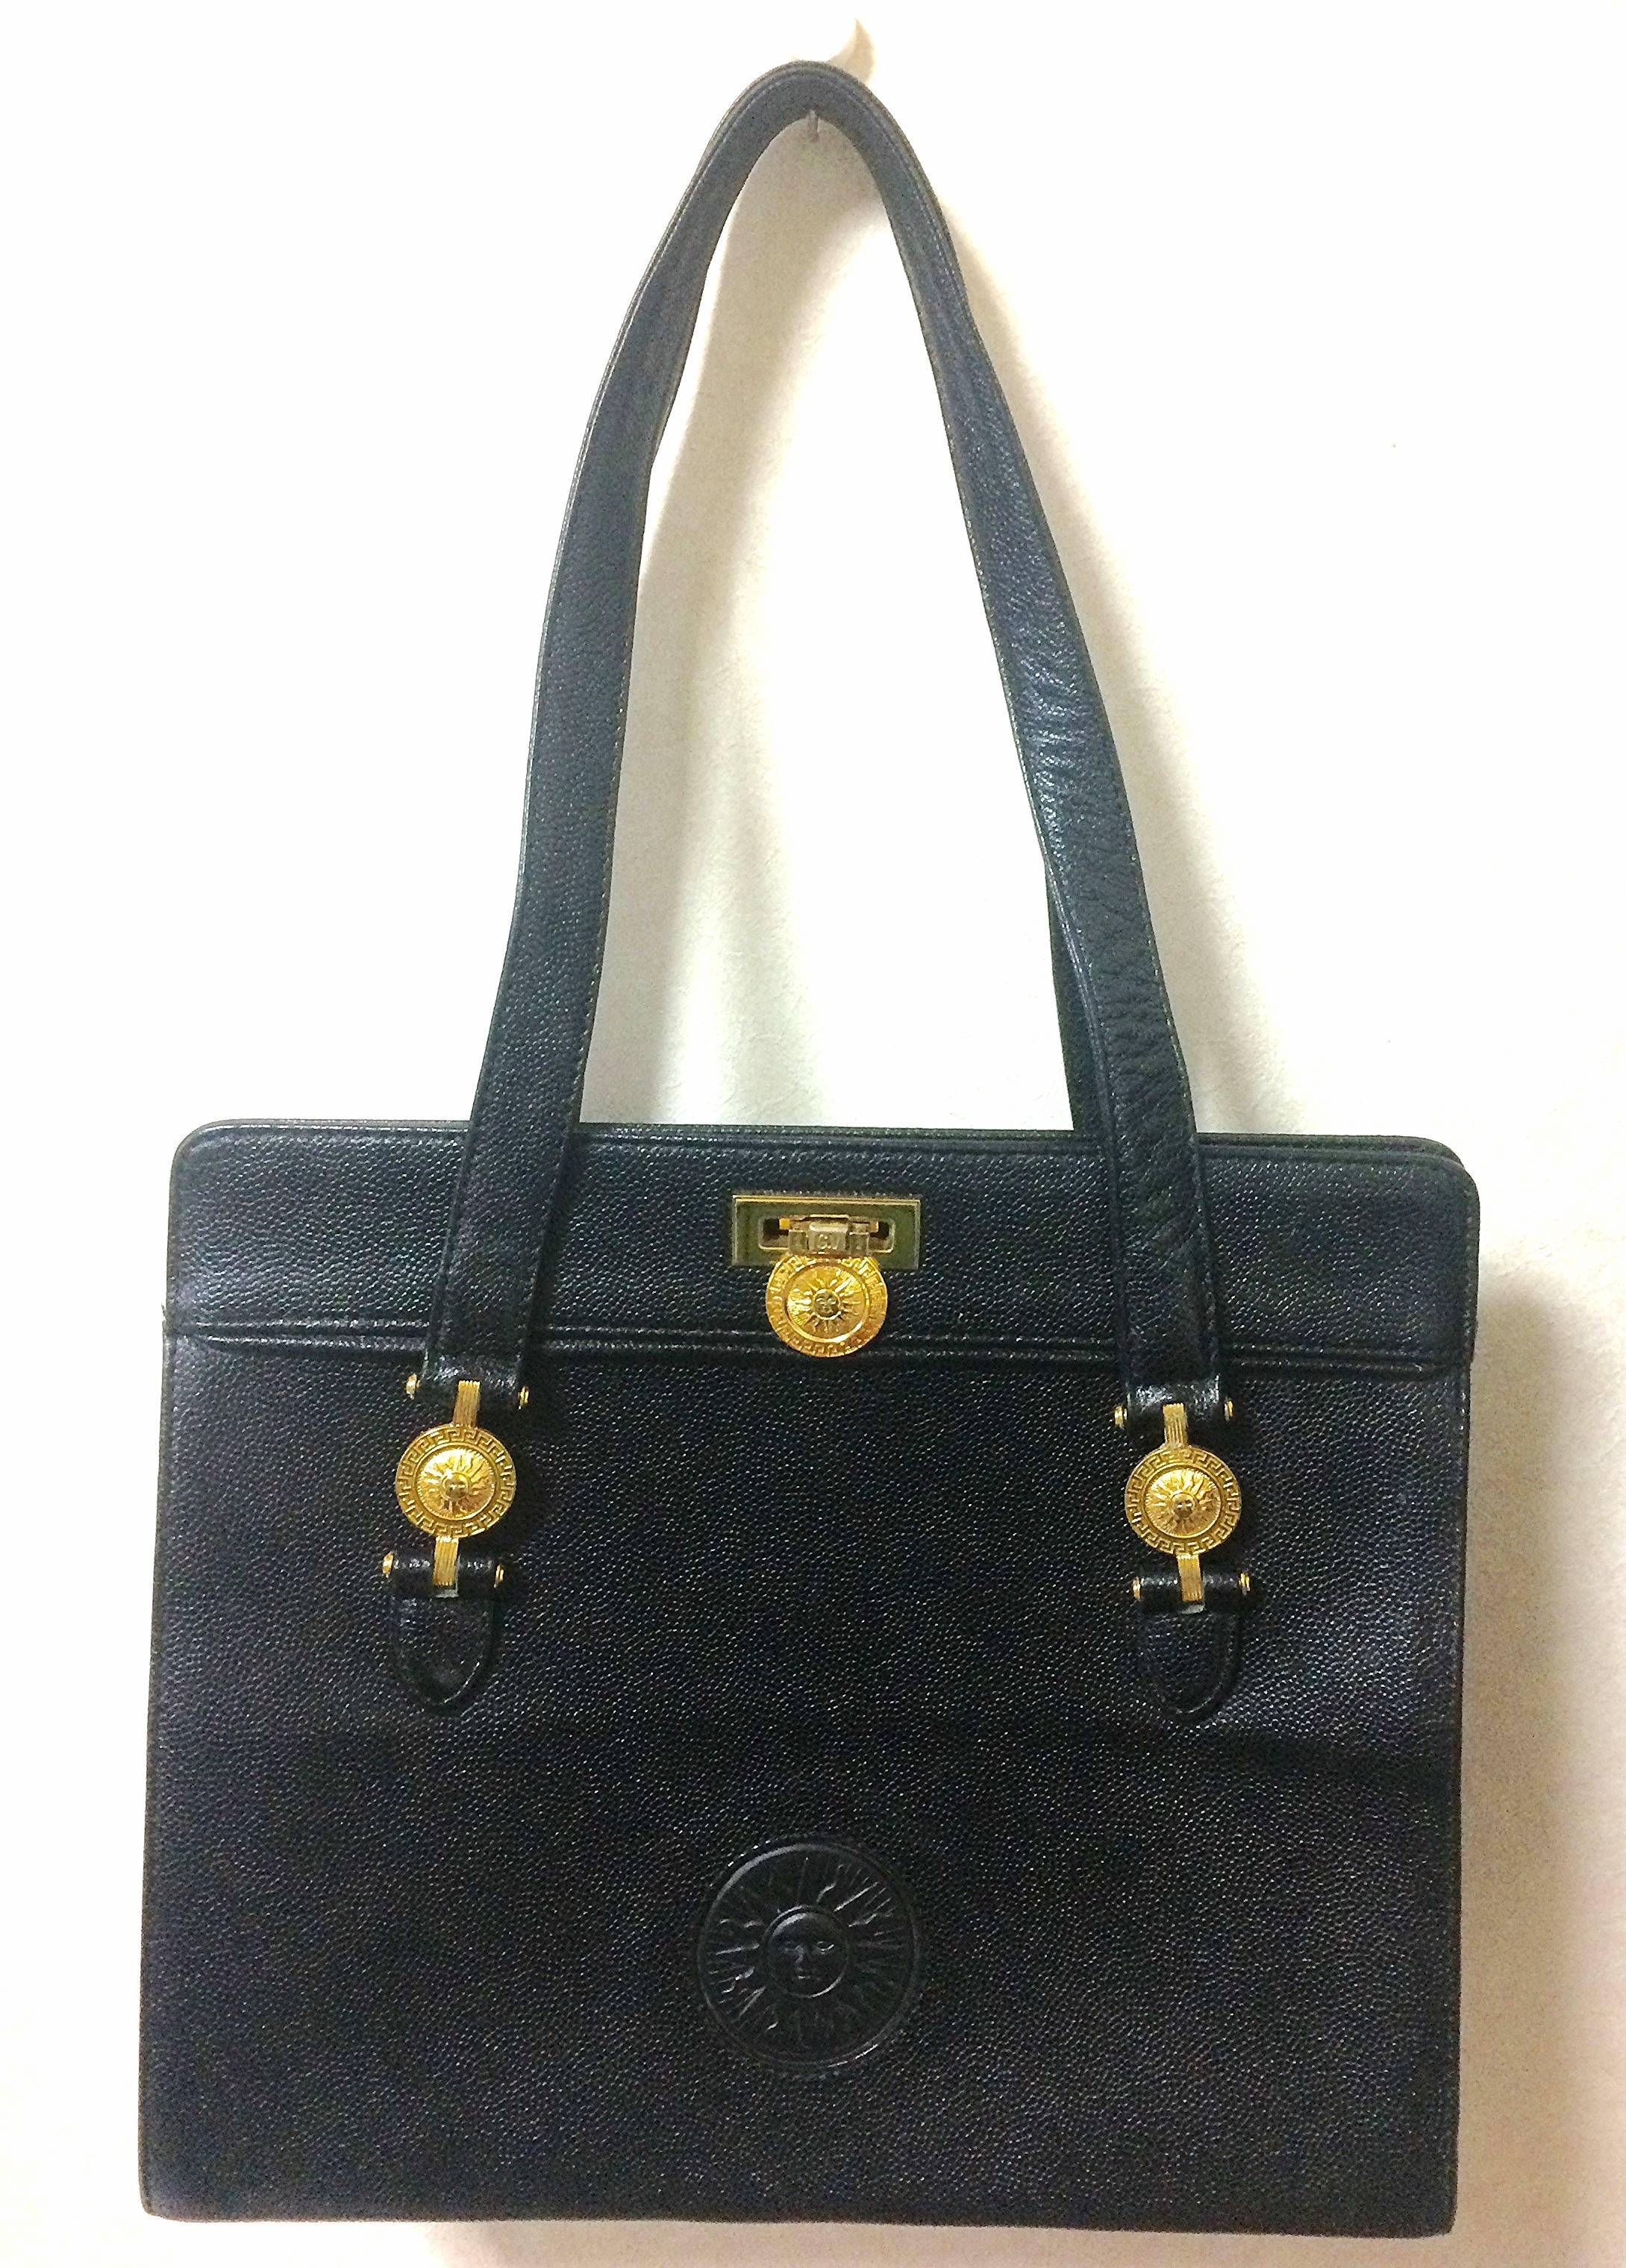 1990s. Vintage Gianni Versace black leather tote bag with golden sunburst motifs. Lady Gaga style shoulder bag for daily use.

Introducing another rare vintage masterpiece from Gianni Versace back in the 90's.
If you are looking for vintage